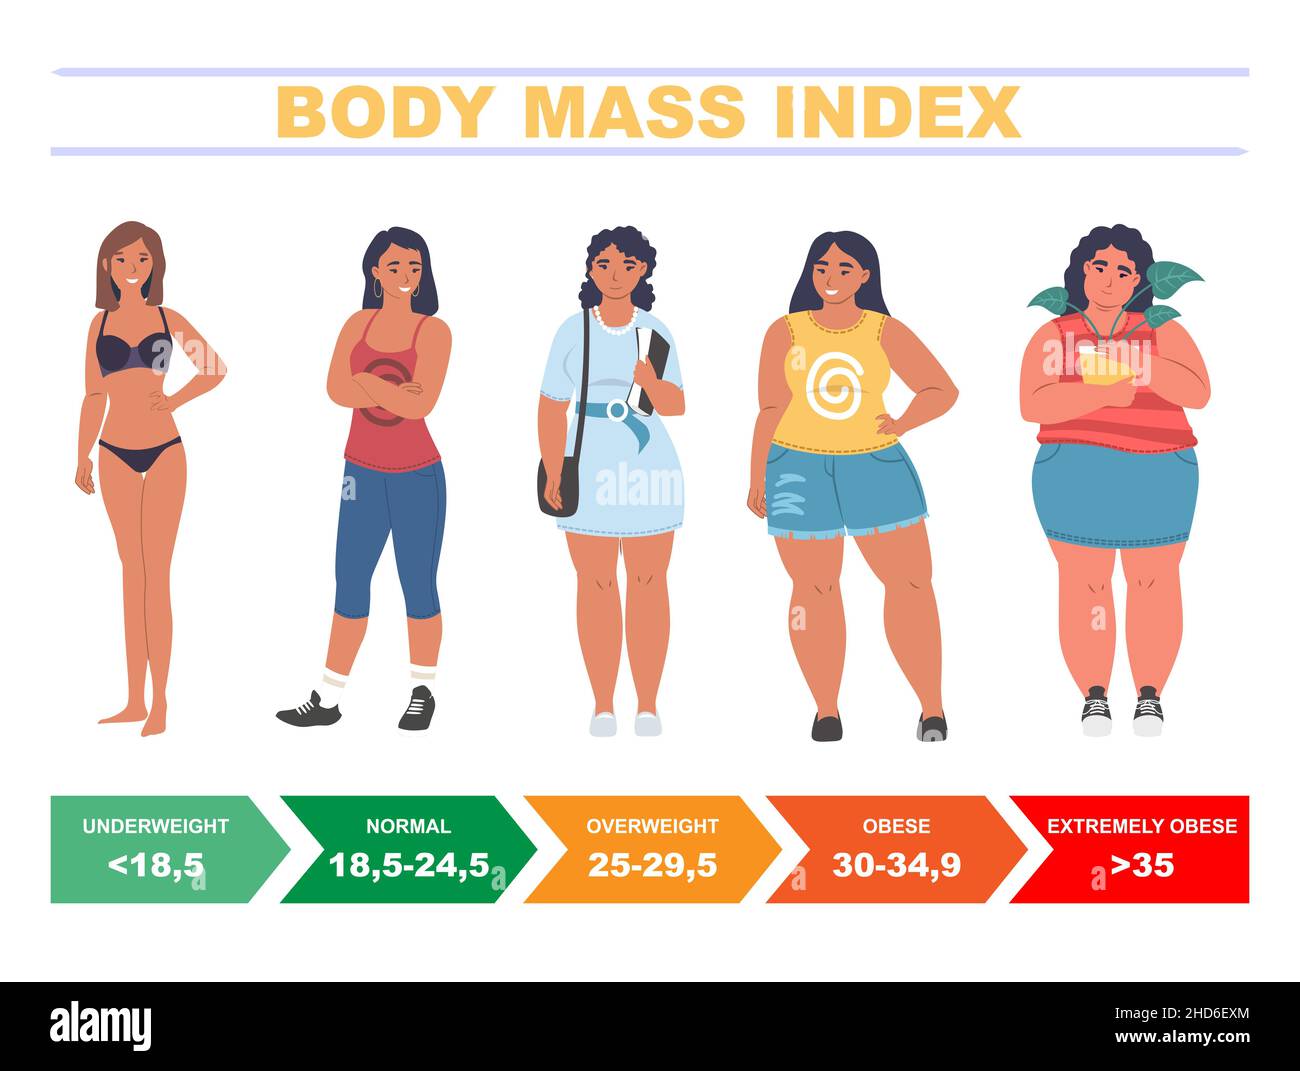 Overweight woman on obese chart scale controls bmi